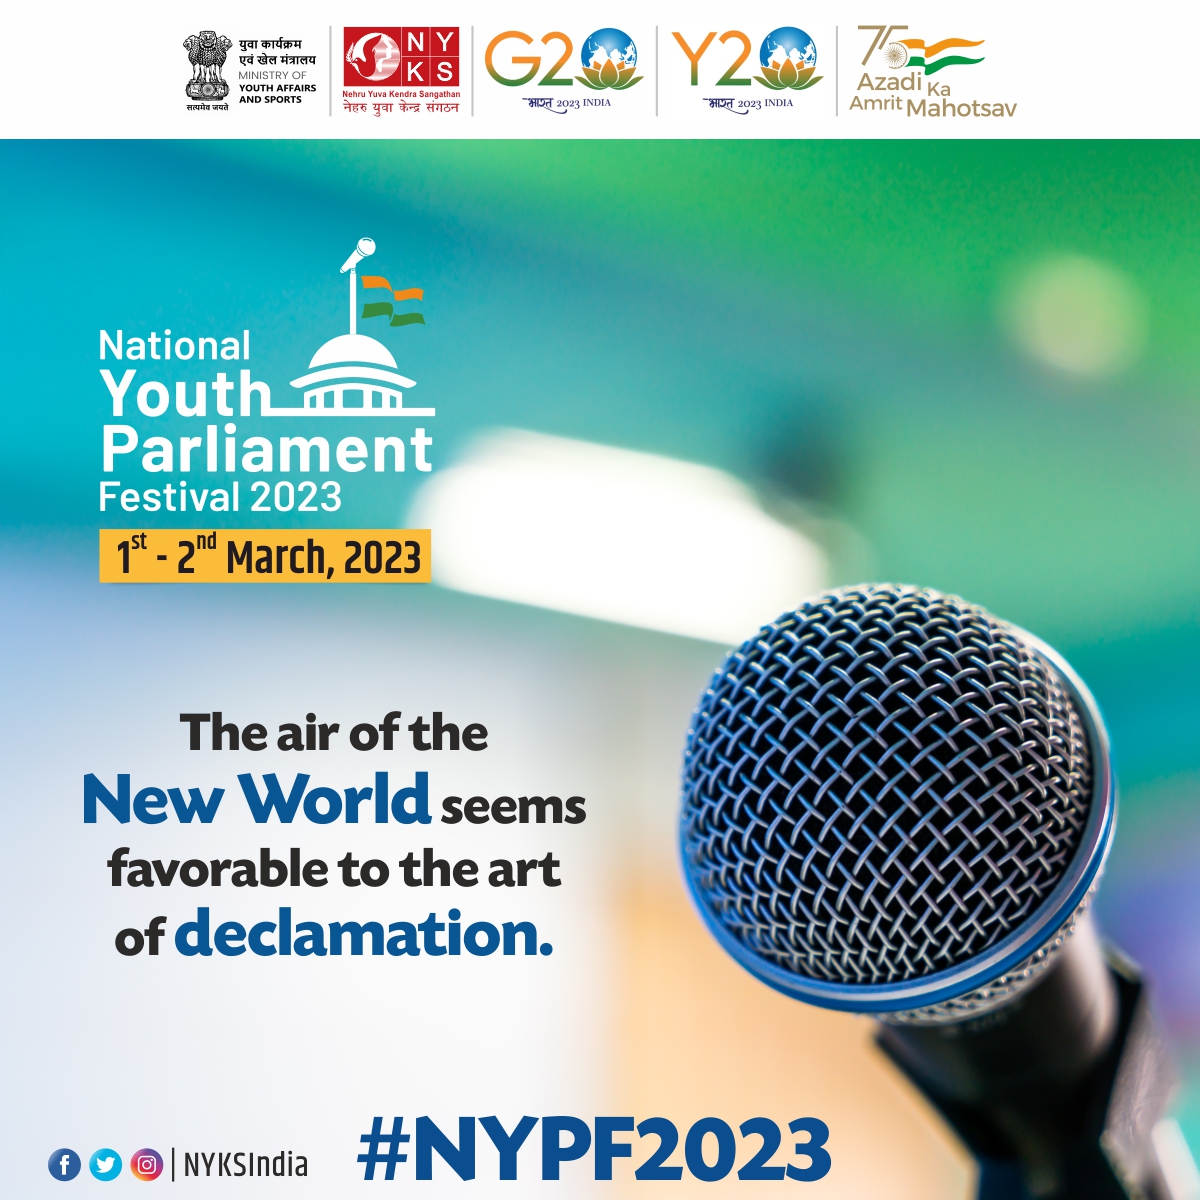 Only a few hours are left... 
Be ready for the National Youth Parliament Festival 2023.🥳🎉🎙️
we are excited! Do you?

Stay tuned for more updates on #NYPF2023

#NYPF #YouthProgram #YuvaShakti #YouthPower 
@LokSabhaSectt @AmritMahotsav